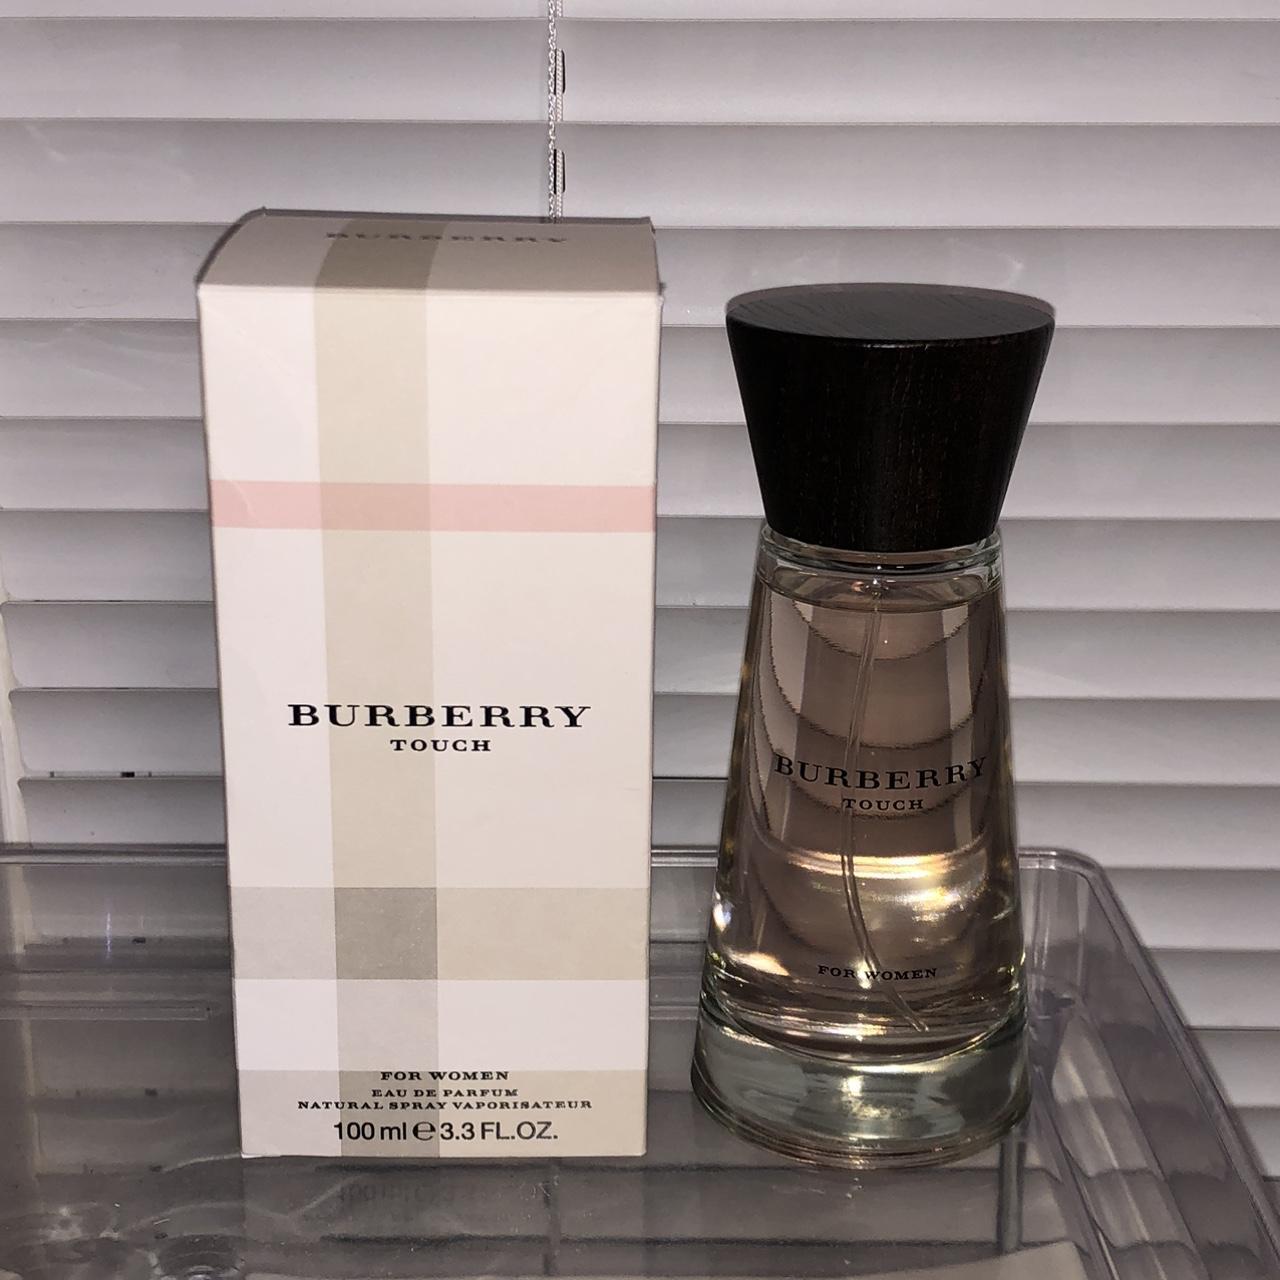 DM Before Touch EDP Depop Burberry Women... • Buying - for